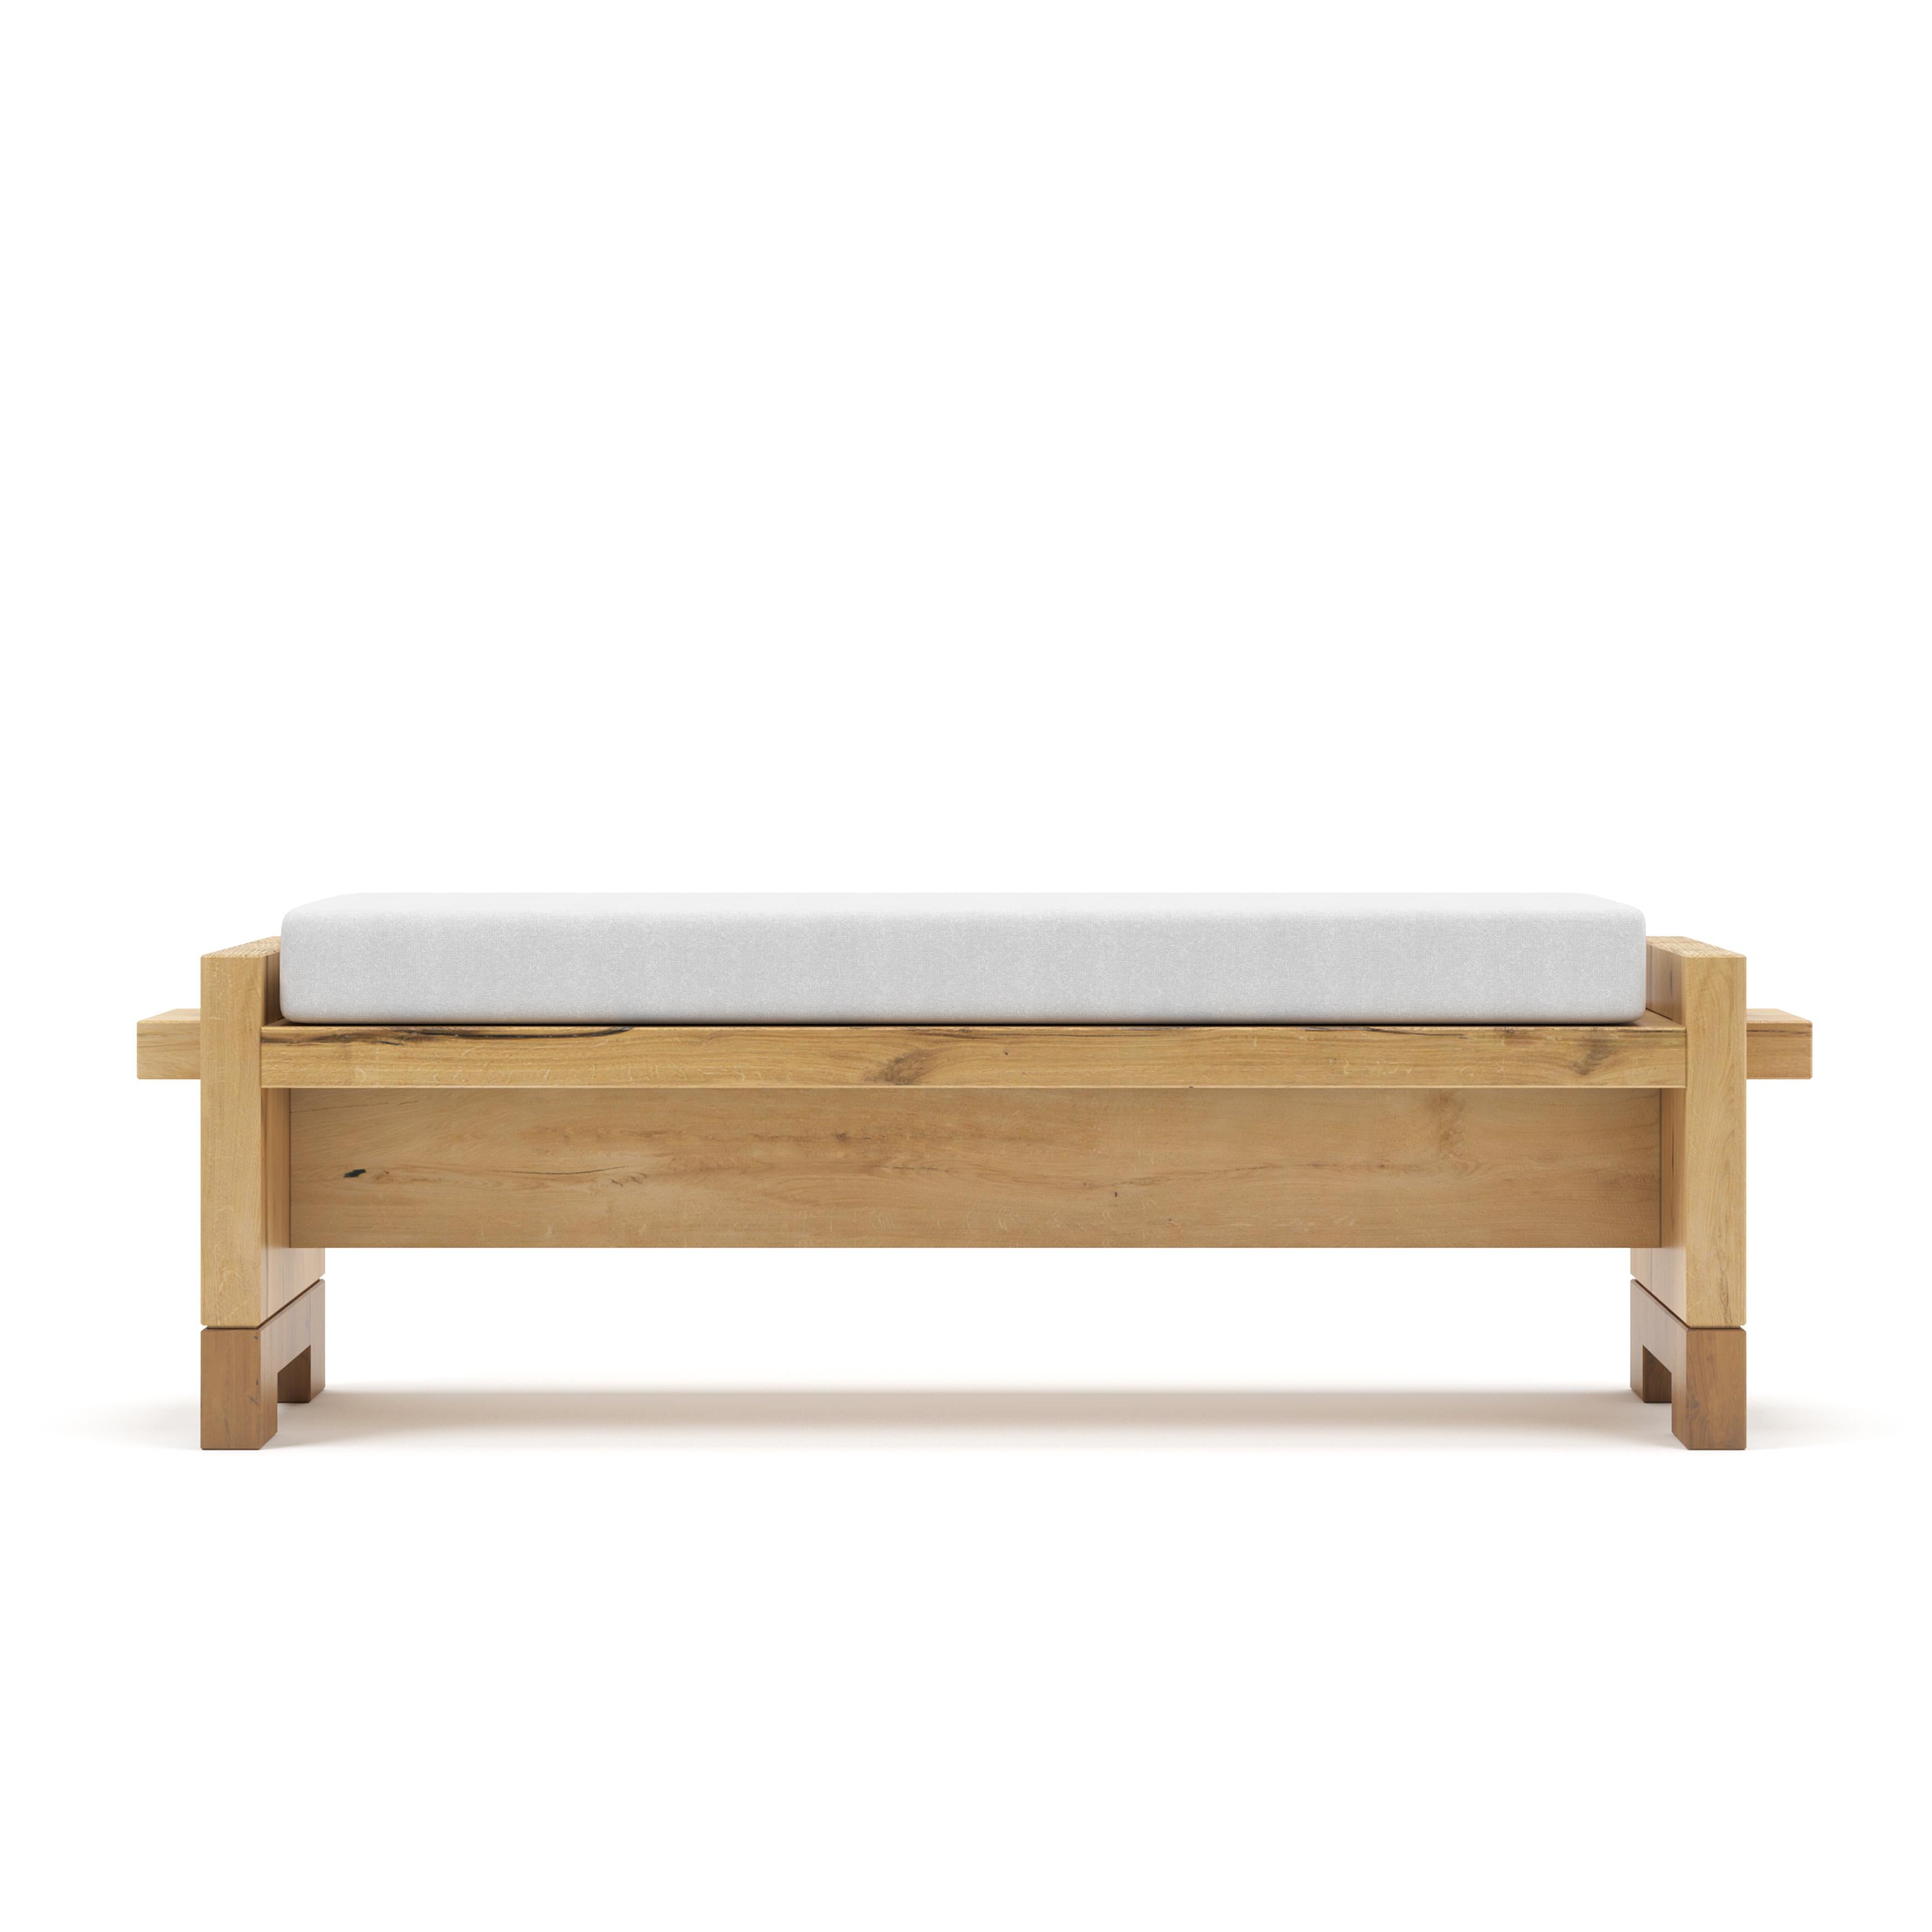 Experience the beauty of nature in your bedroom with the Dala-Bedroom Bench. Crafted from massive oak, this bench showcases the beauty of wood connections to bring a peaceful, serene atmosphere to your space. Enjoy the timeless elegance of the